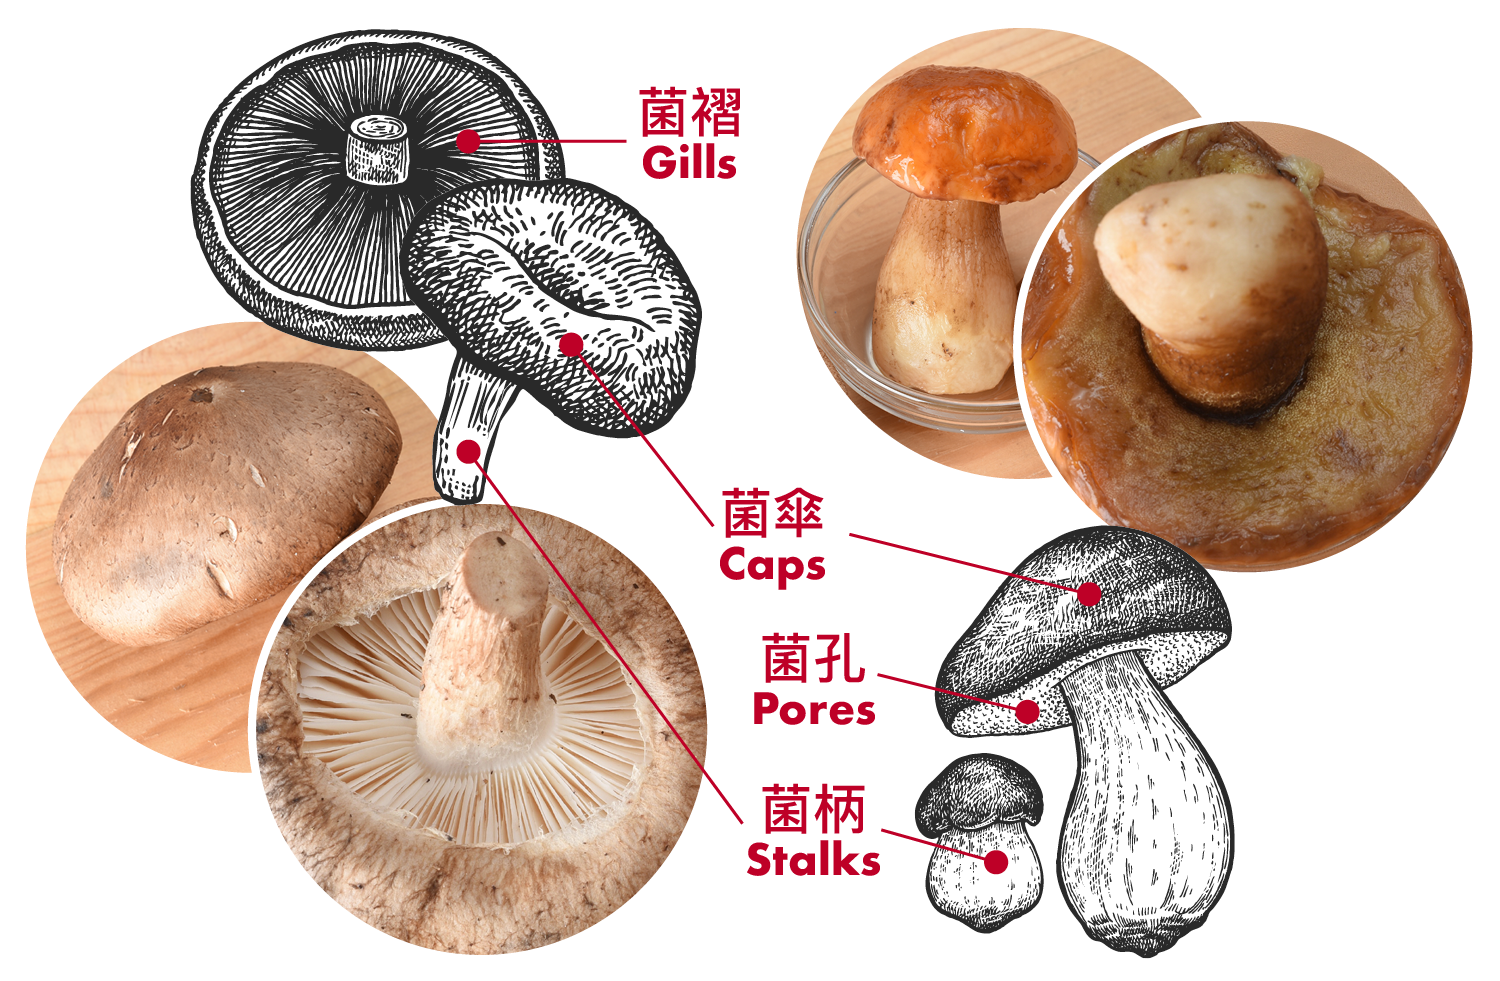 Figure 1: Compare with shiitake mushrooms (left), boletes (right) have pores rather than gills on the underside of the cap.